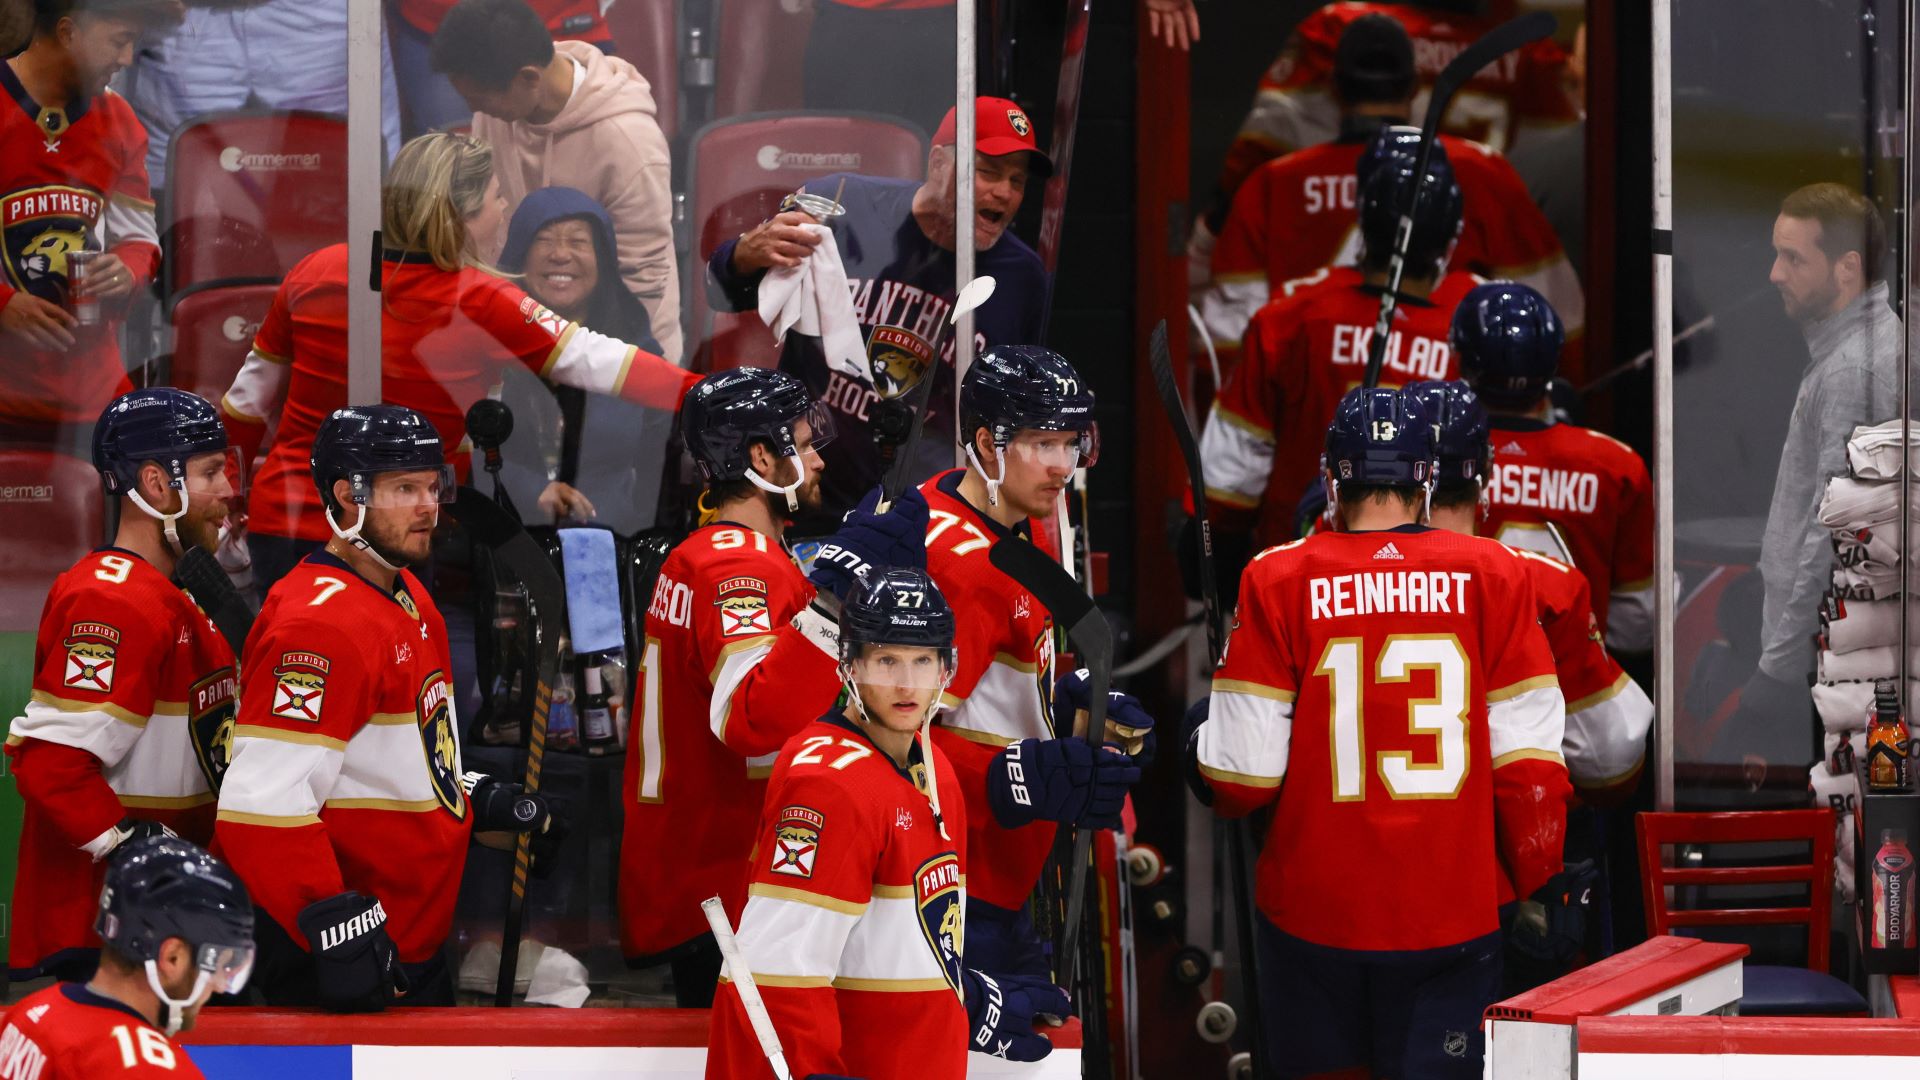 P.K. Subban Sends Message To Irked Panthers Fans After Game 5